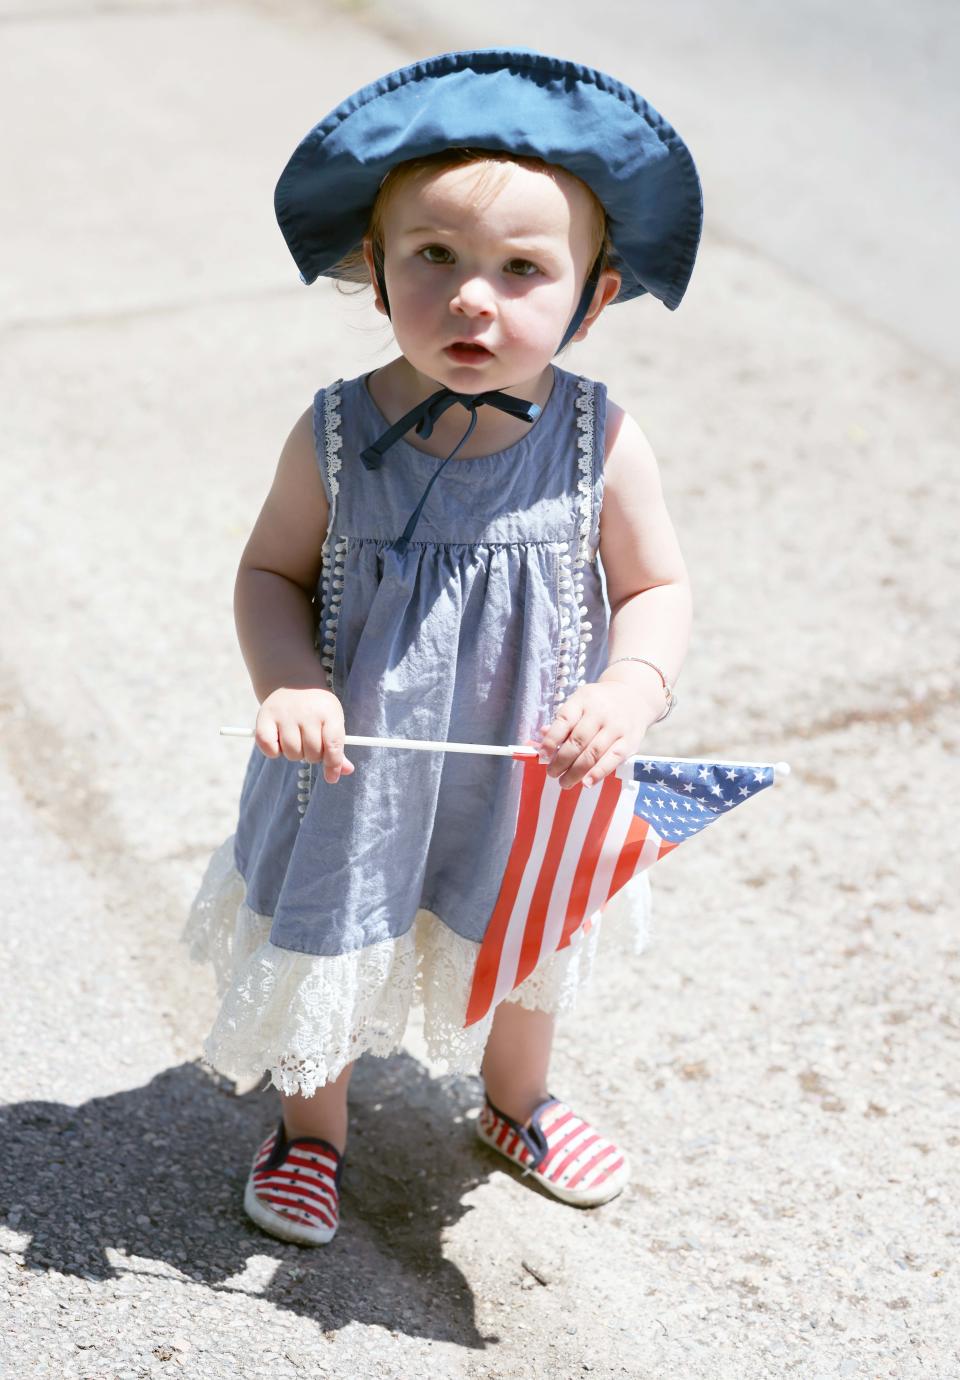 Noelle Jean, 14 months, shows her patriotic spirit at the Easton Memorial Day parade on Monday, May 30, 2022.